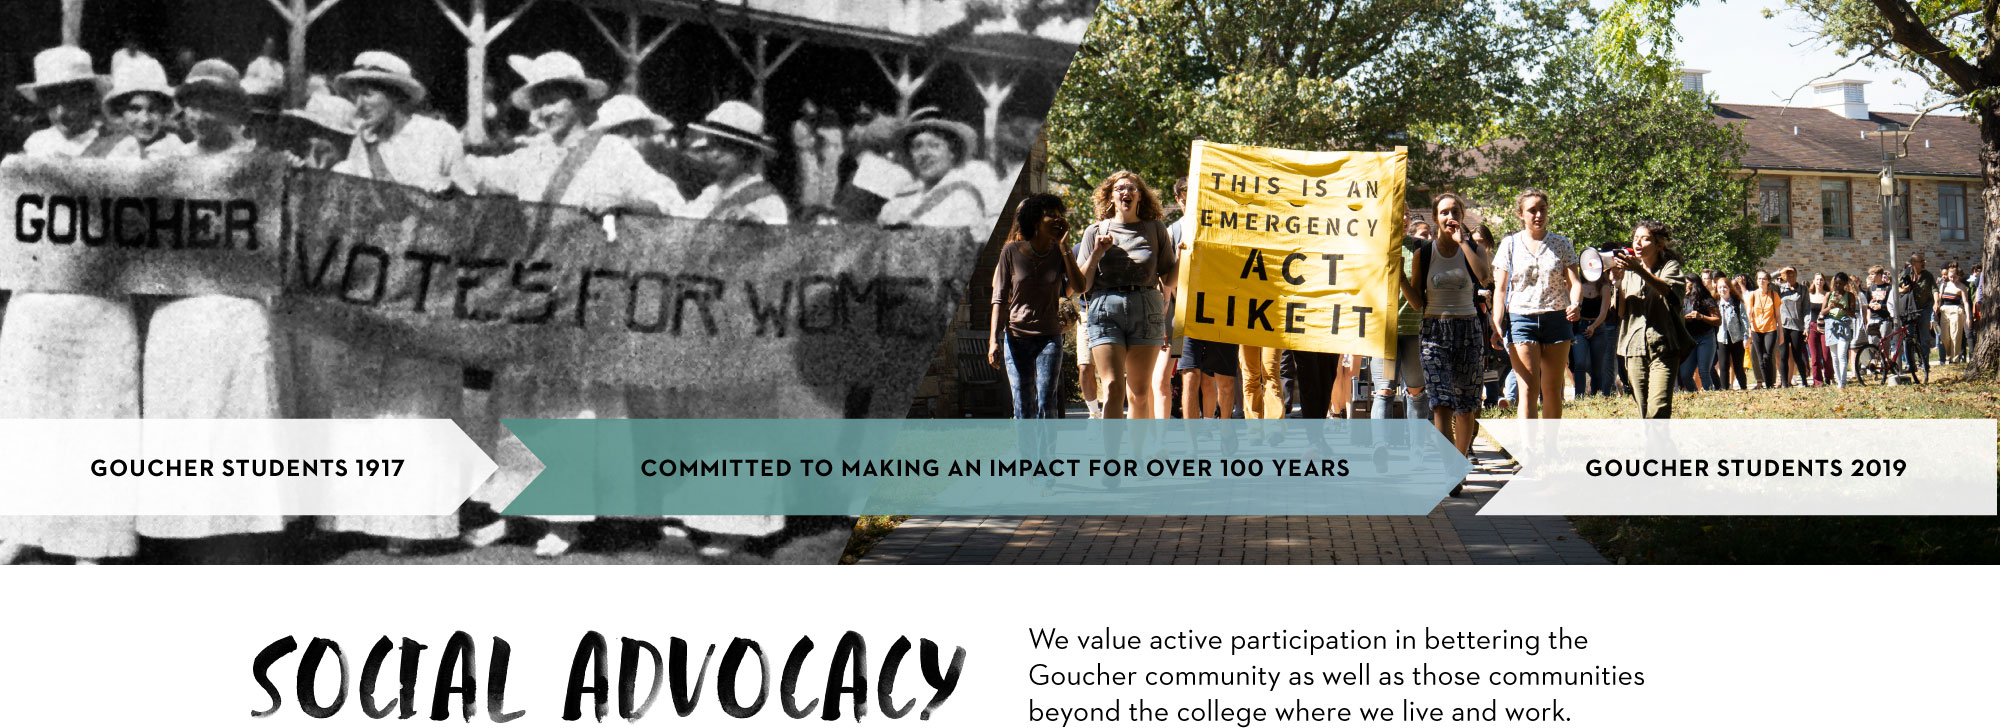 Social Advocacy we value active participation in bettering the Goucher Community as well as those communities beyond the college where we live and work